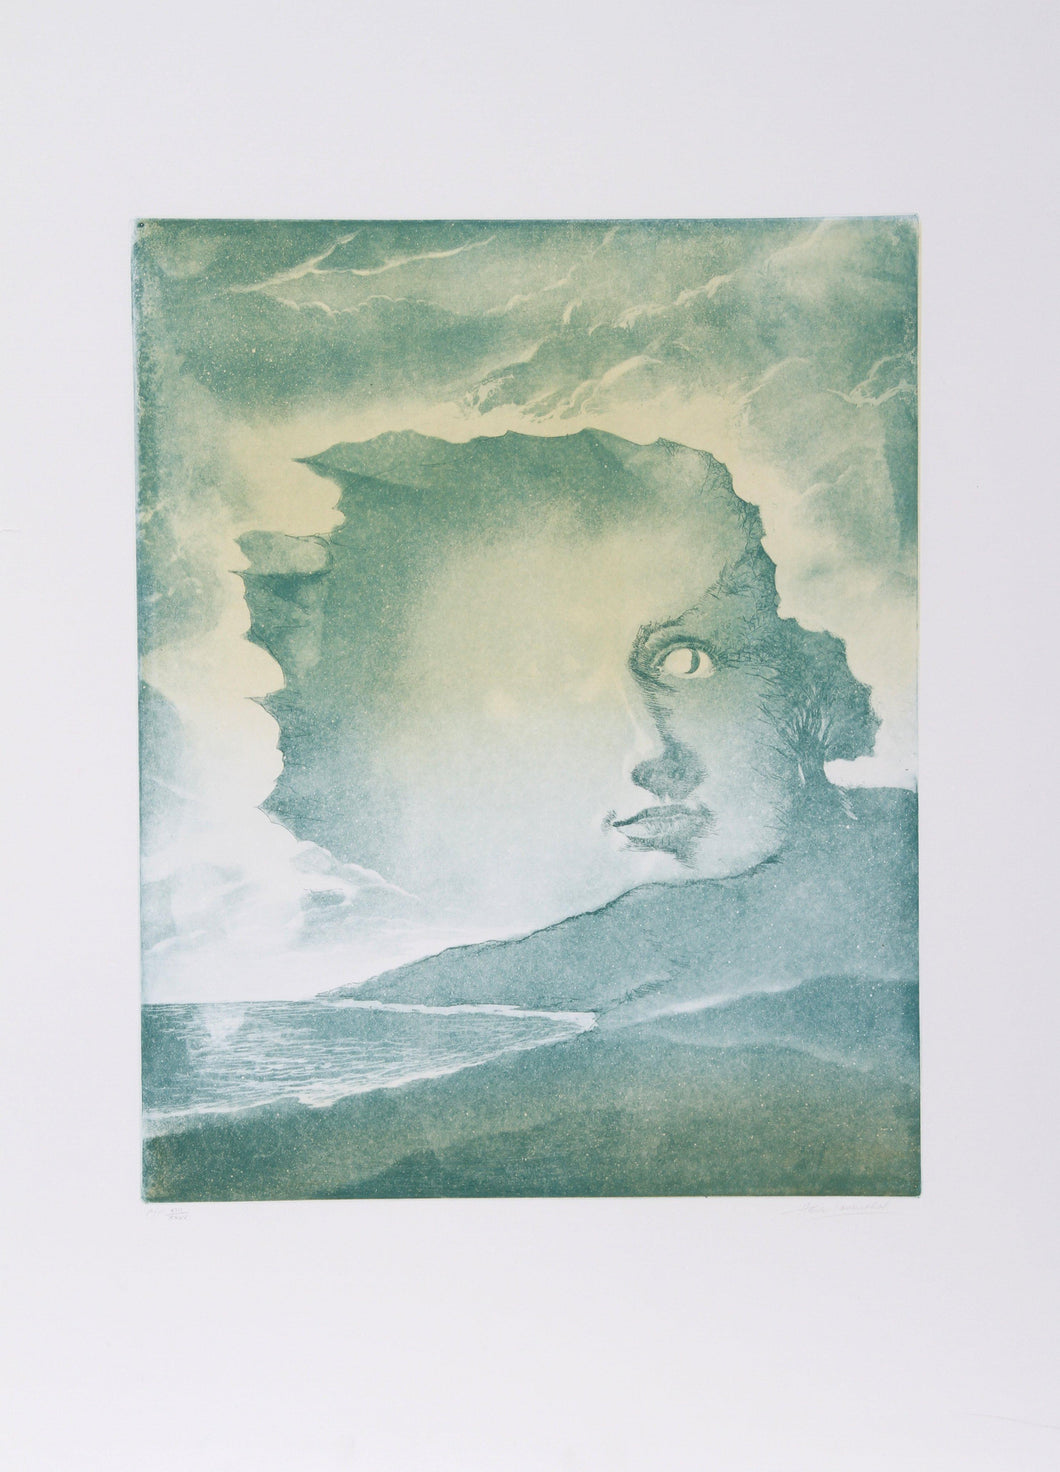 Face in Mountains Etching | Hank Laventhol,{{product.type}}